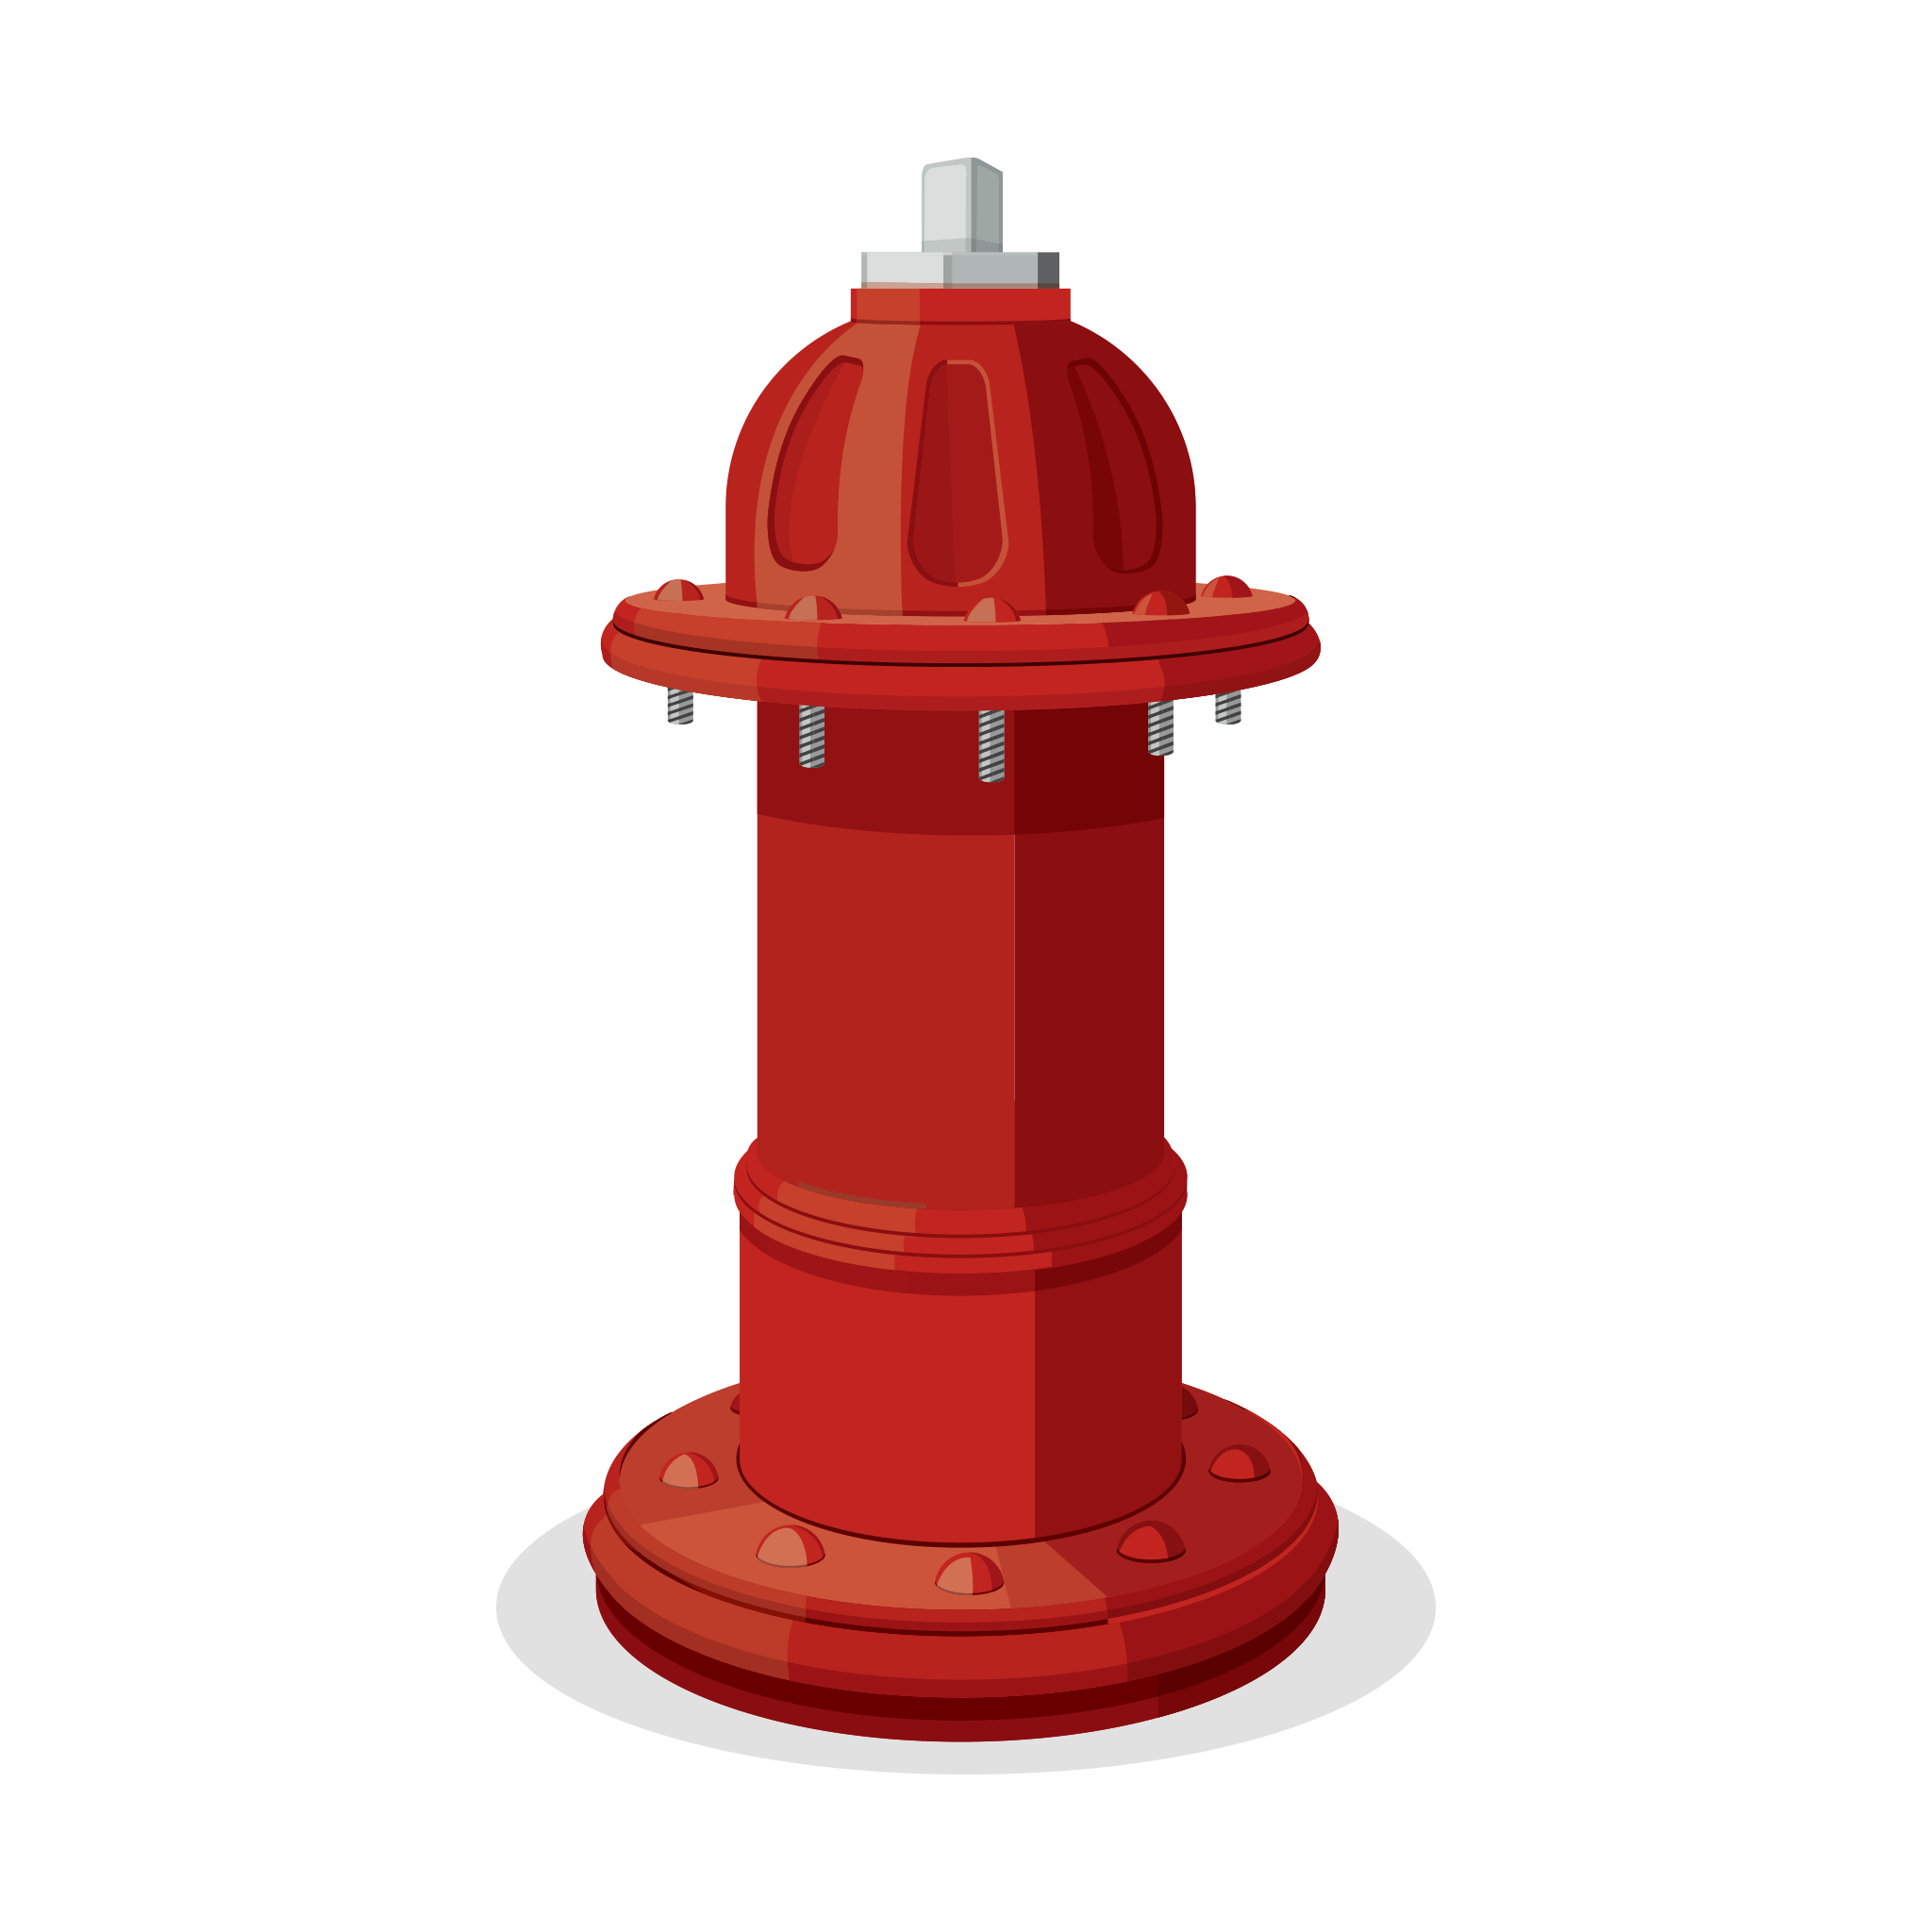 Fire Hydrant PNG HD Image